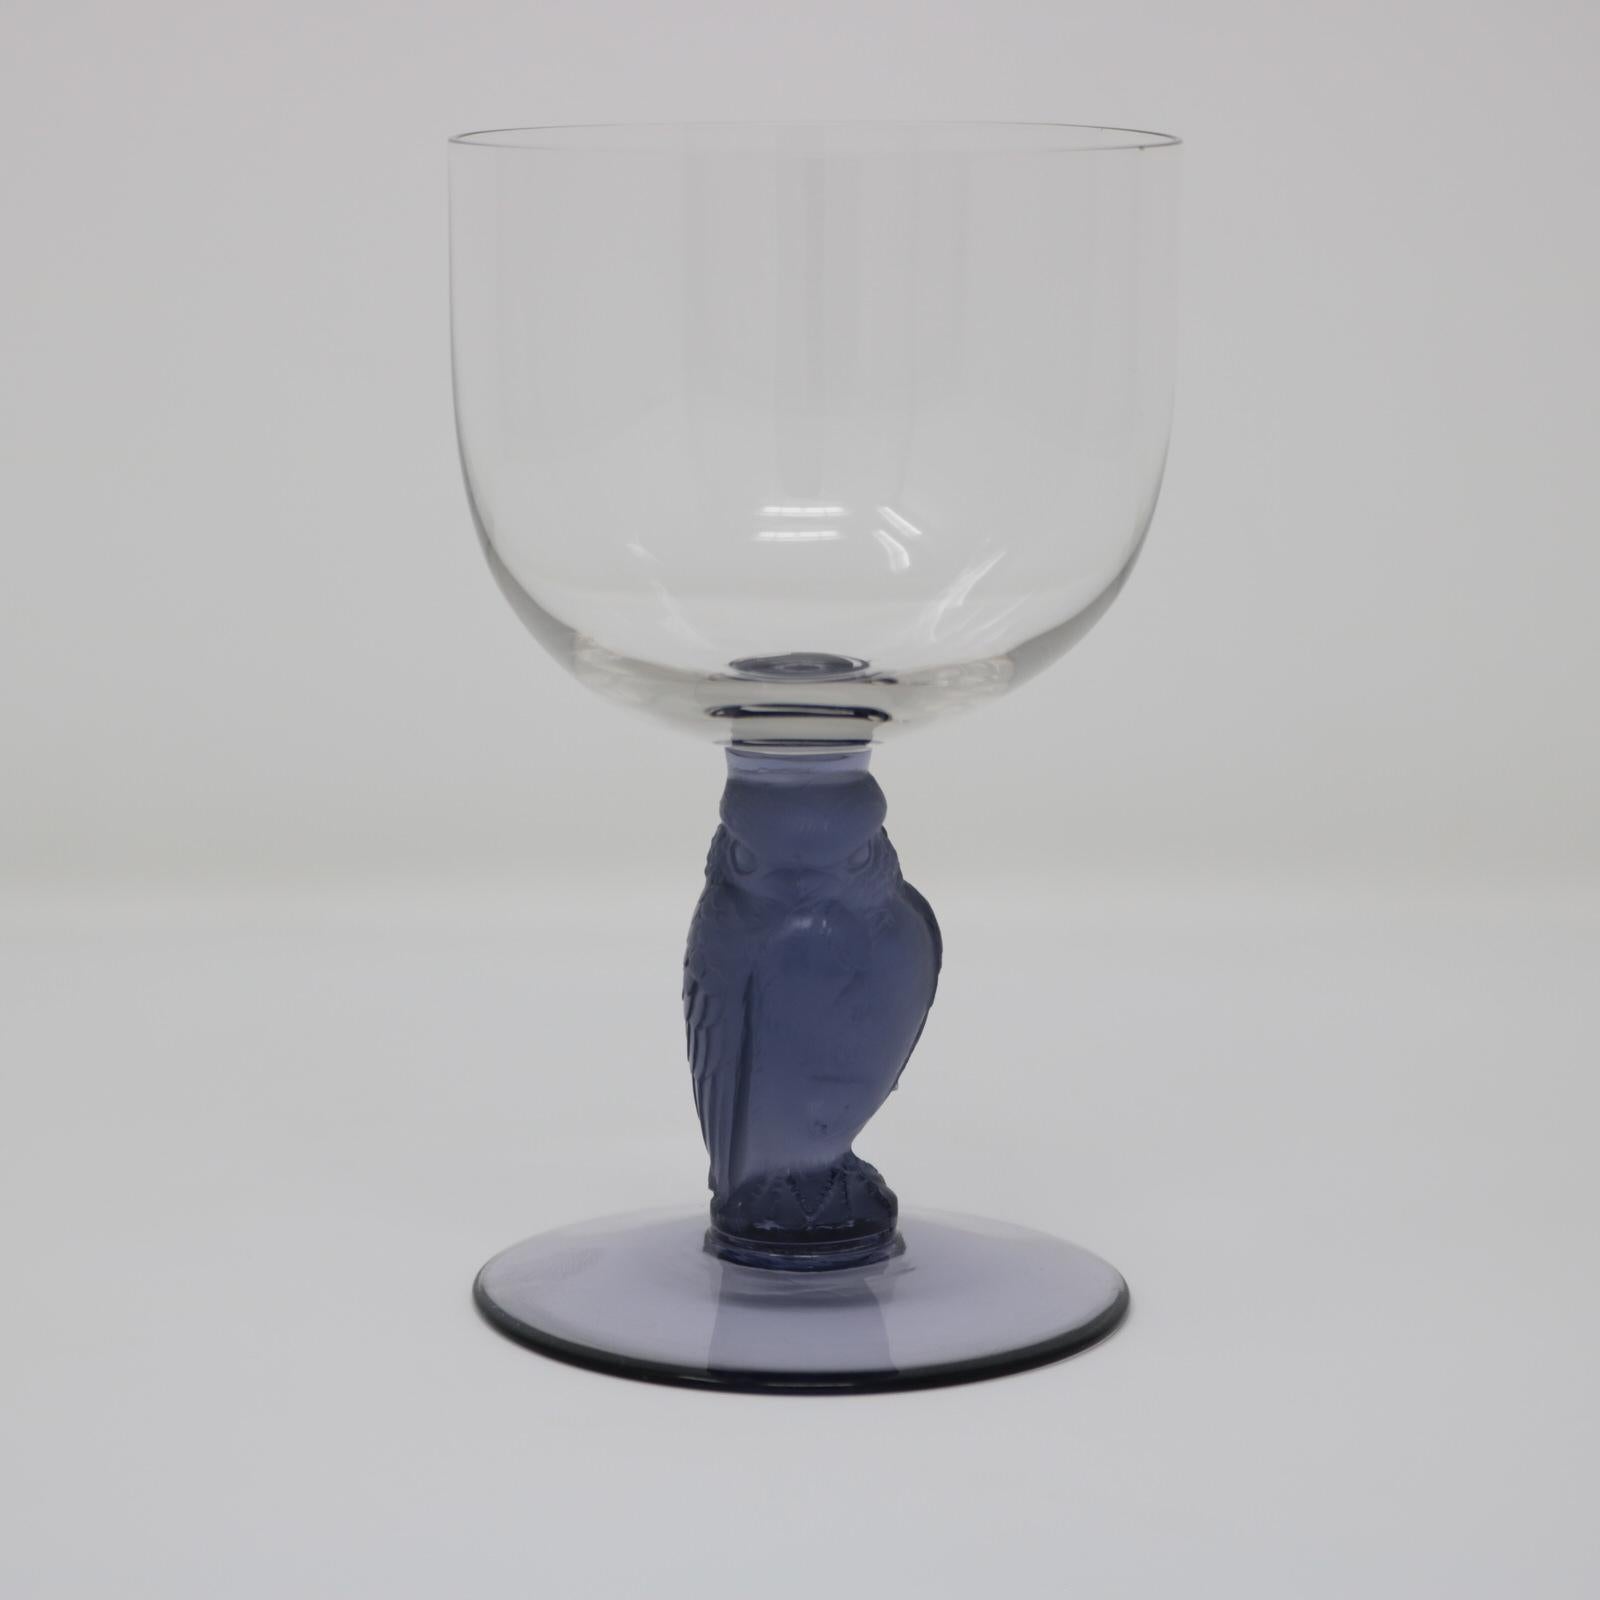 Rene Lalique glass 'Rapace' drinking glass. Clear glass bowl and foot. Blue glass stem modelled in the form of a raptor bird (by direct translation of rapace). Engraved makers mark, 'R Lalique France No.5'. Book reference: Marcilhac page 805,